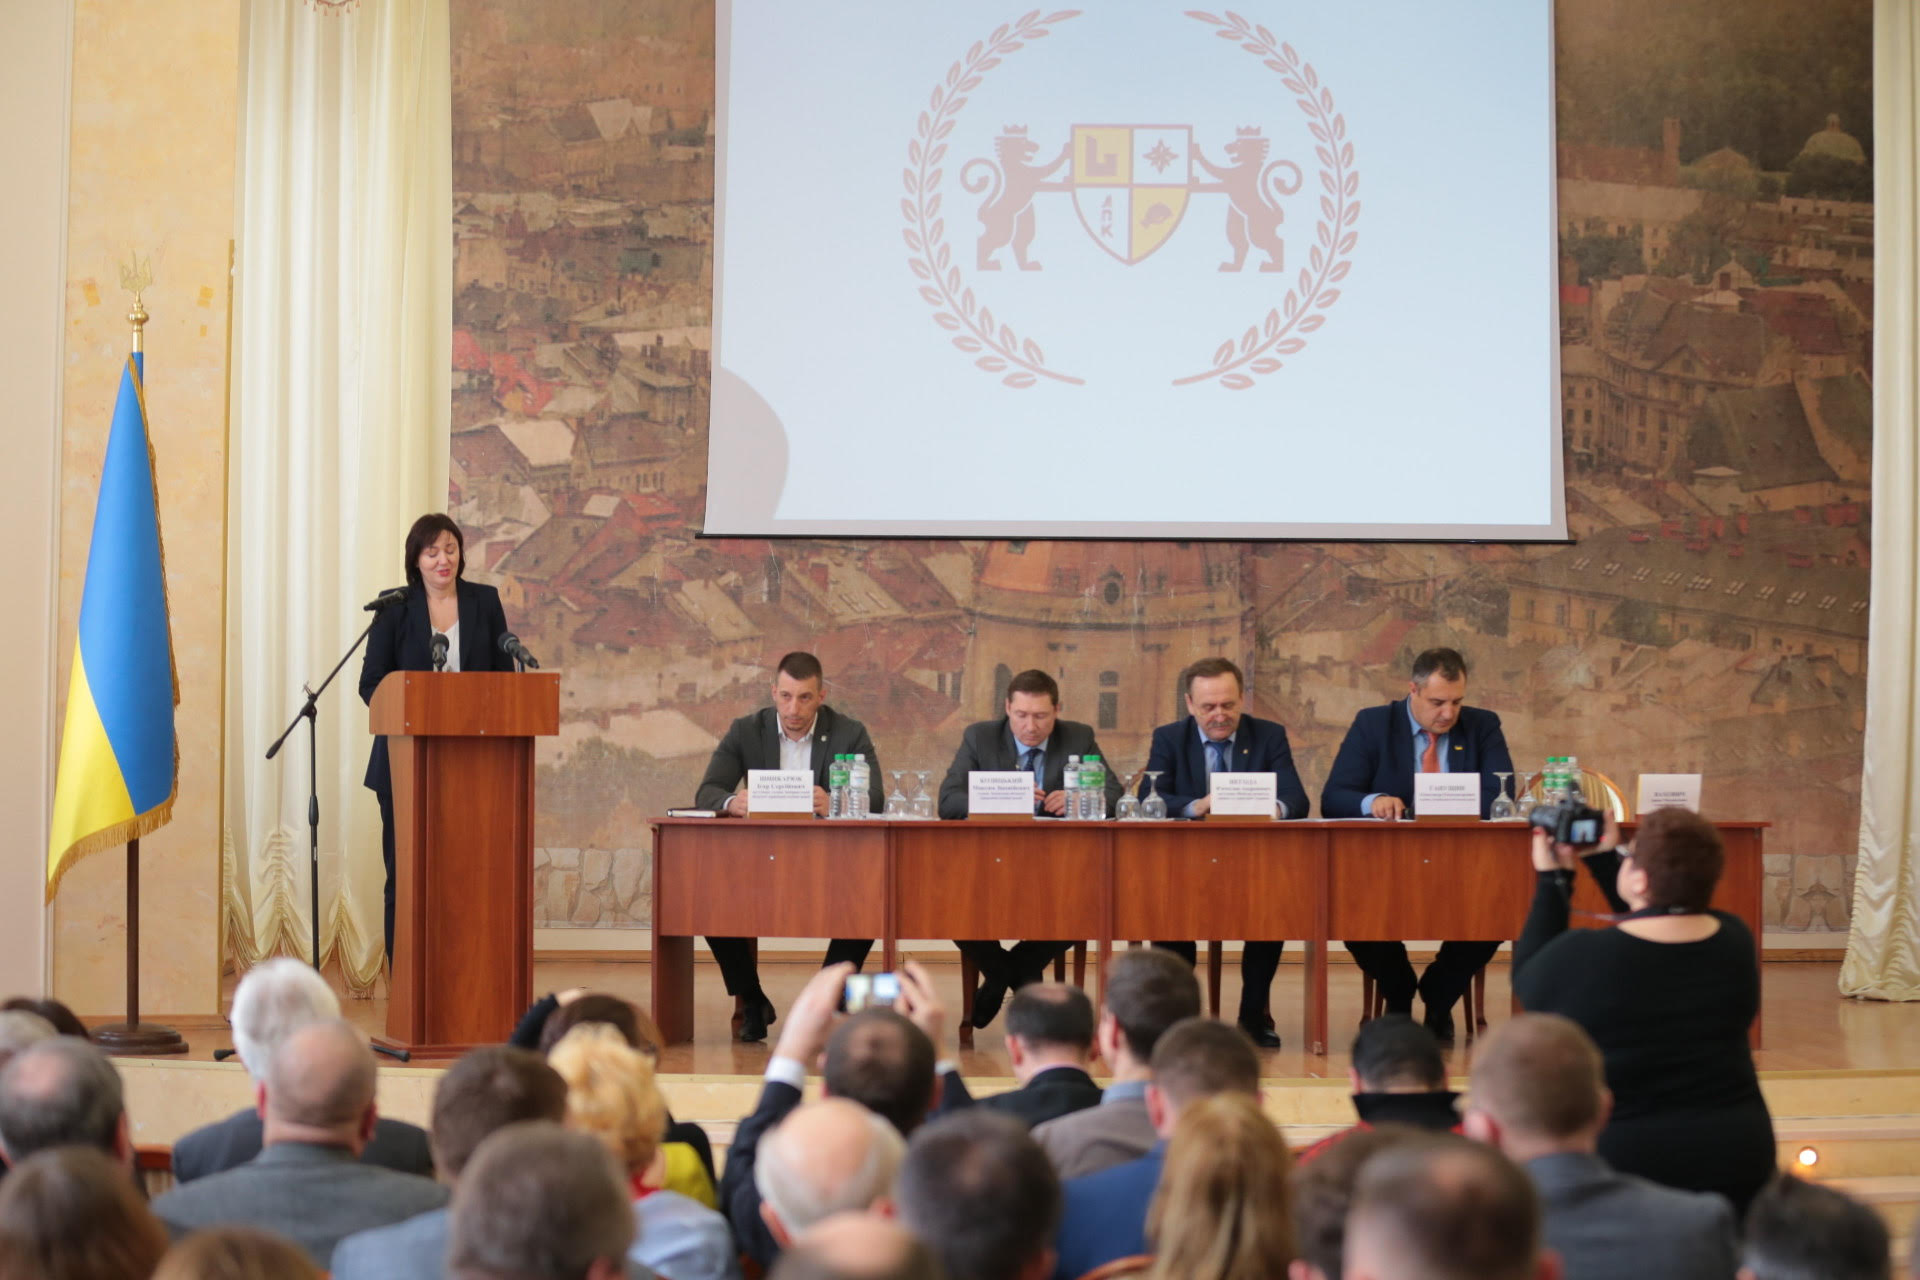 For nobody to be tempted to manipulate the local government: discussing Constitutional amendments in Lviv